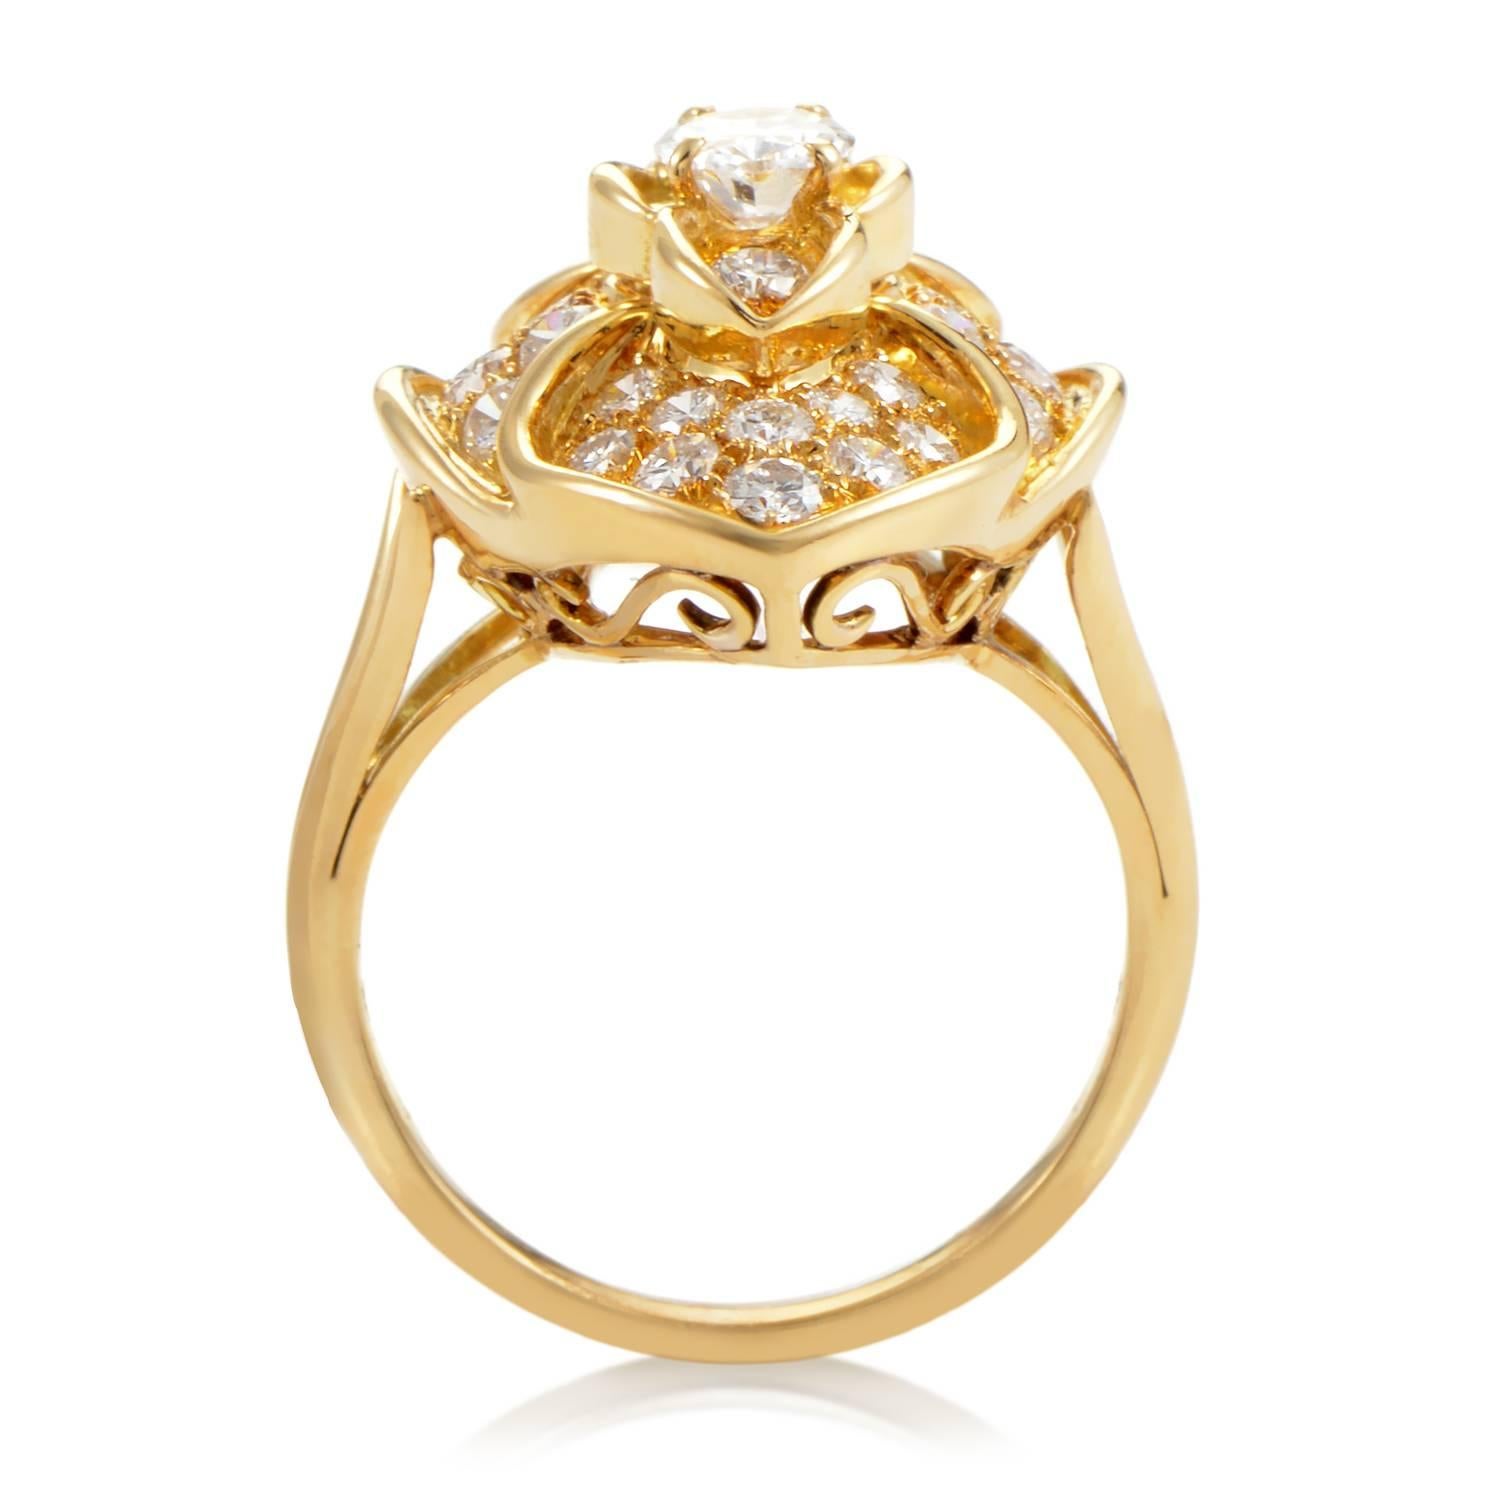 Piaget is renowned for their classically opulent designs. This dazzling delight from the brand is made of 18K yellow gold and boasts an almond-shaped crown set with 1.75ct of dazzling white diamonds.
Ring Size: 5.5 (50 1/4)